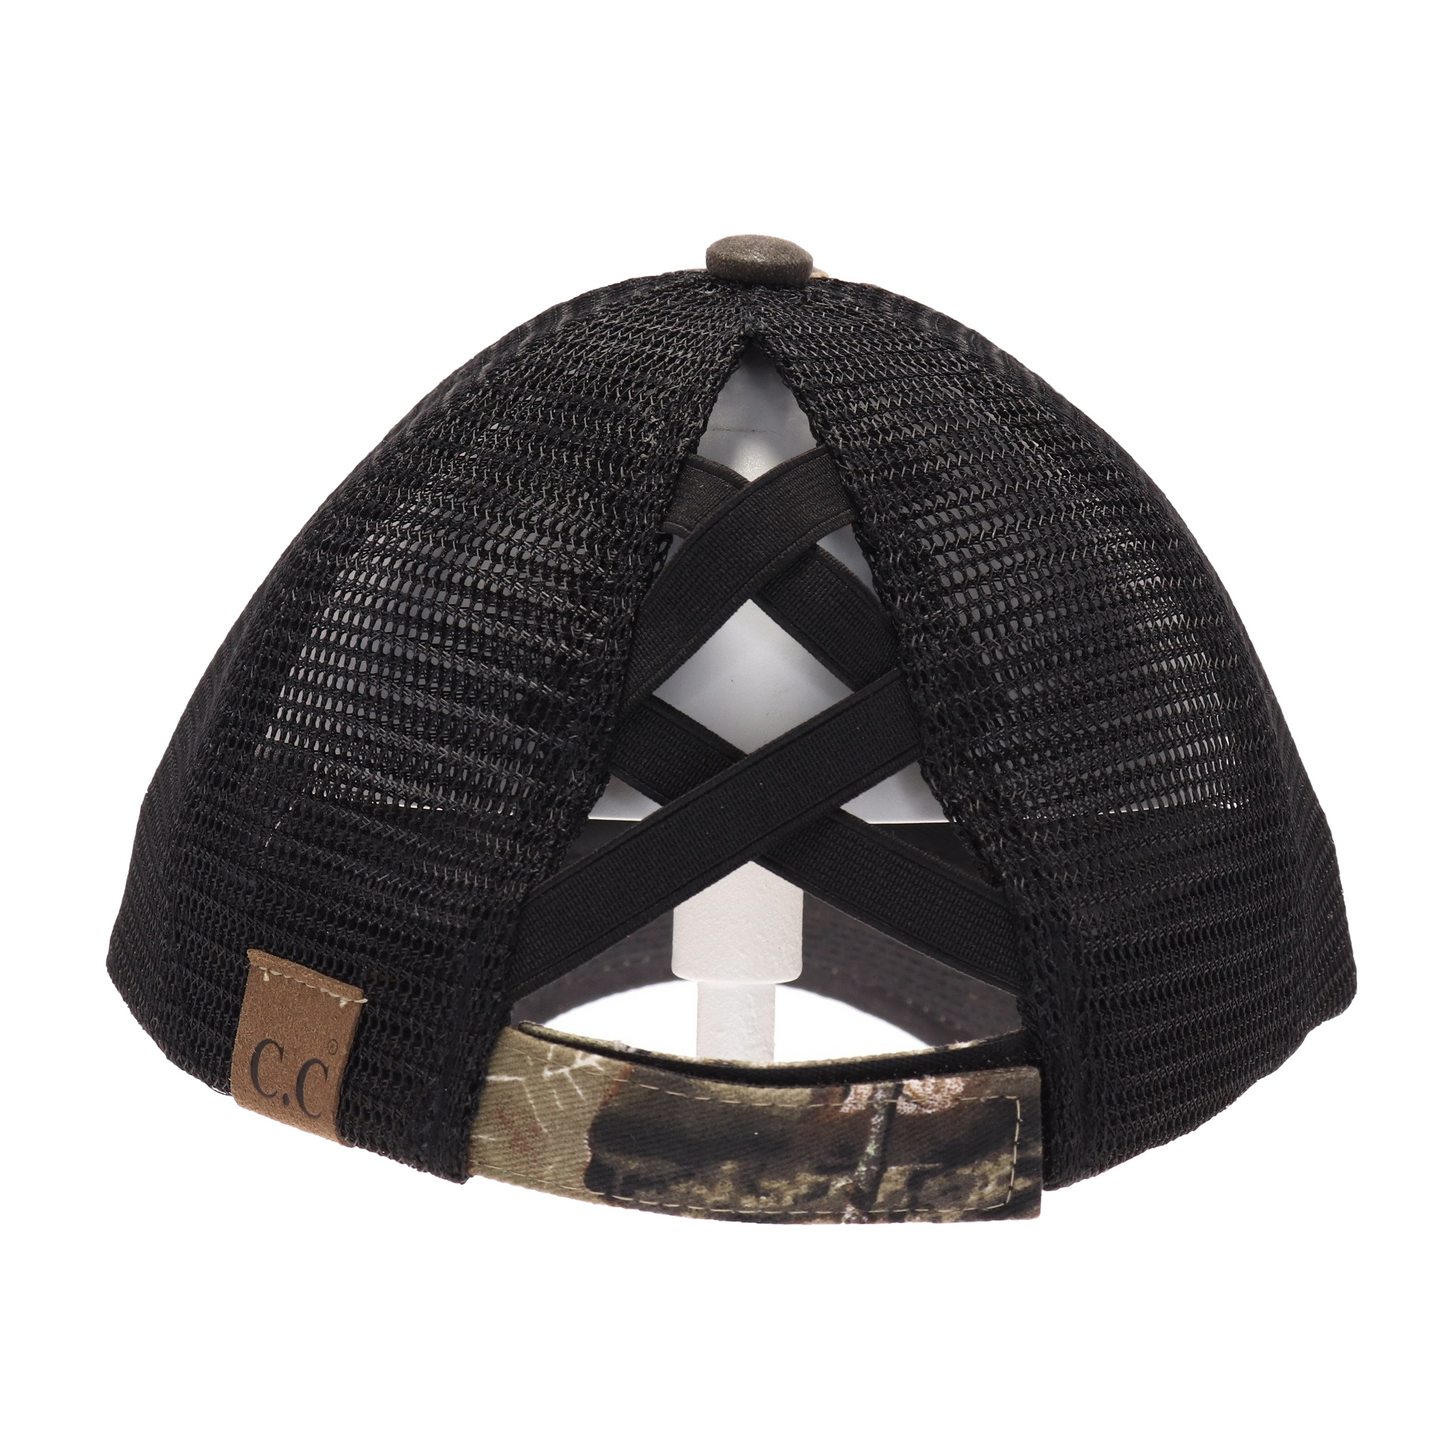 Thin Blue Line Flag Mossy Oak Camouflage Criss Cross Ponytail Hat